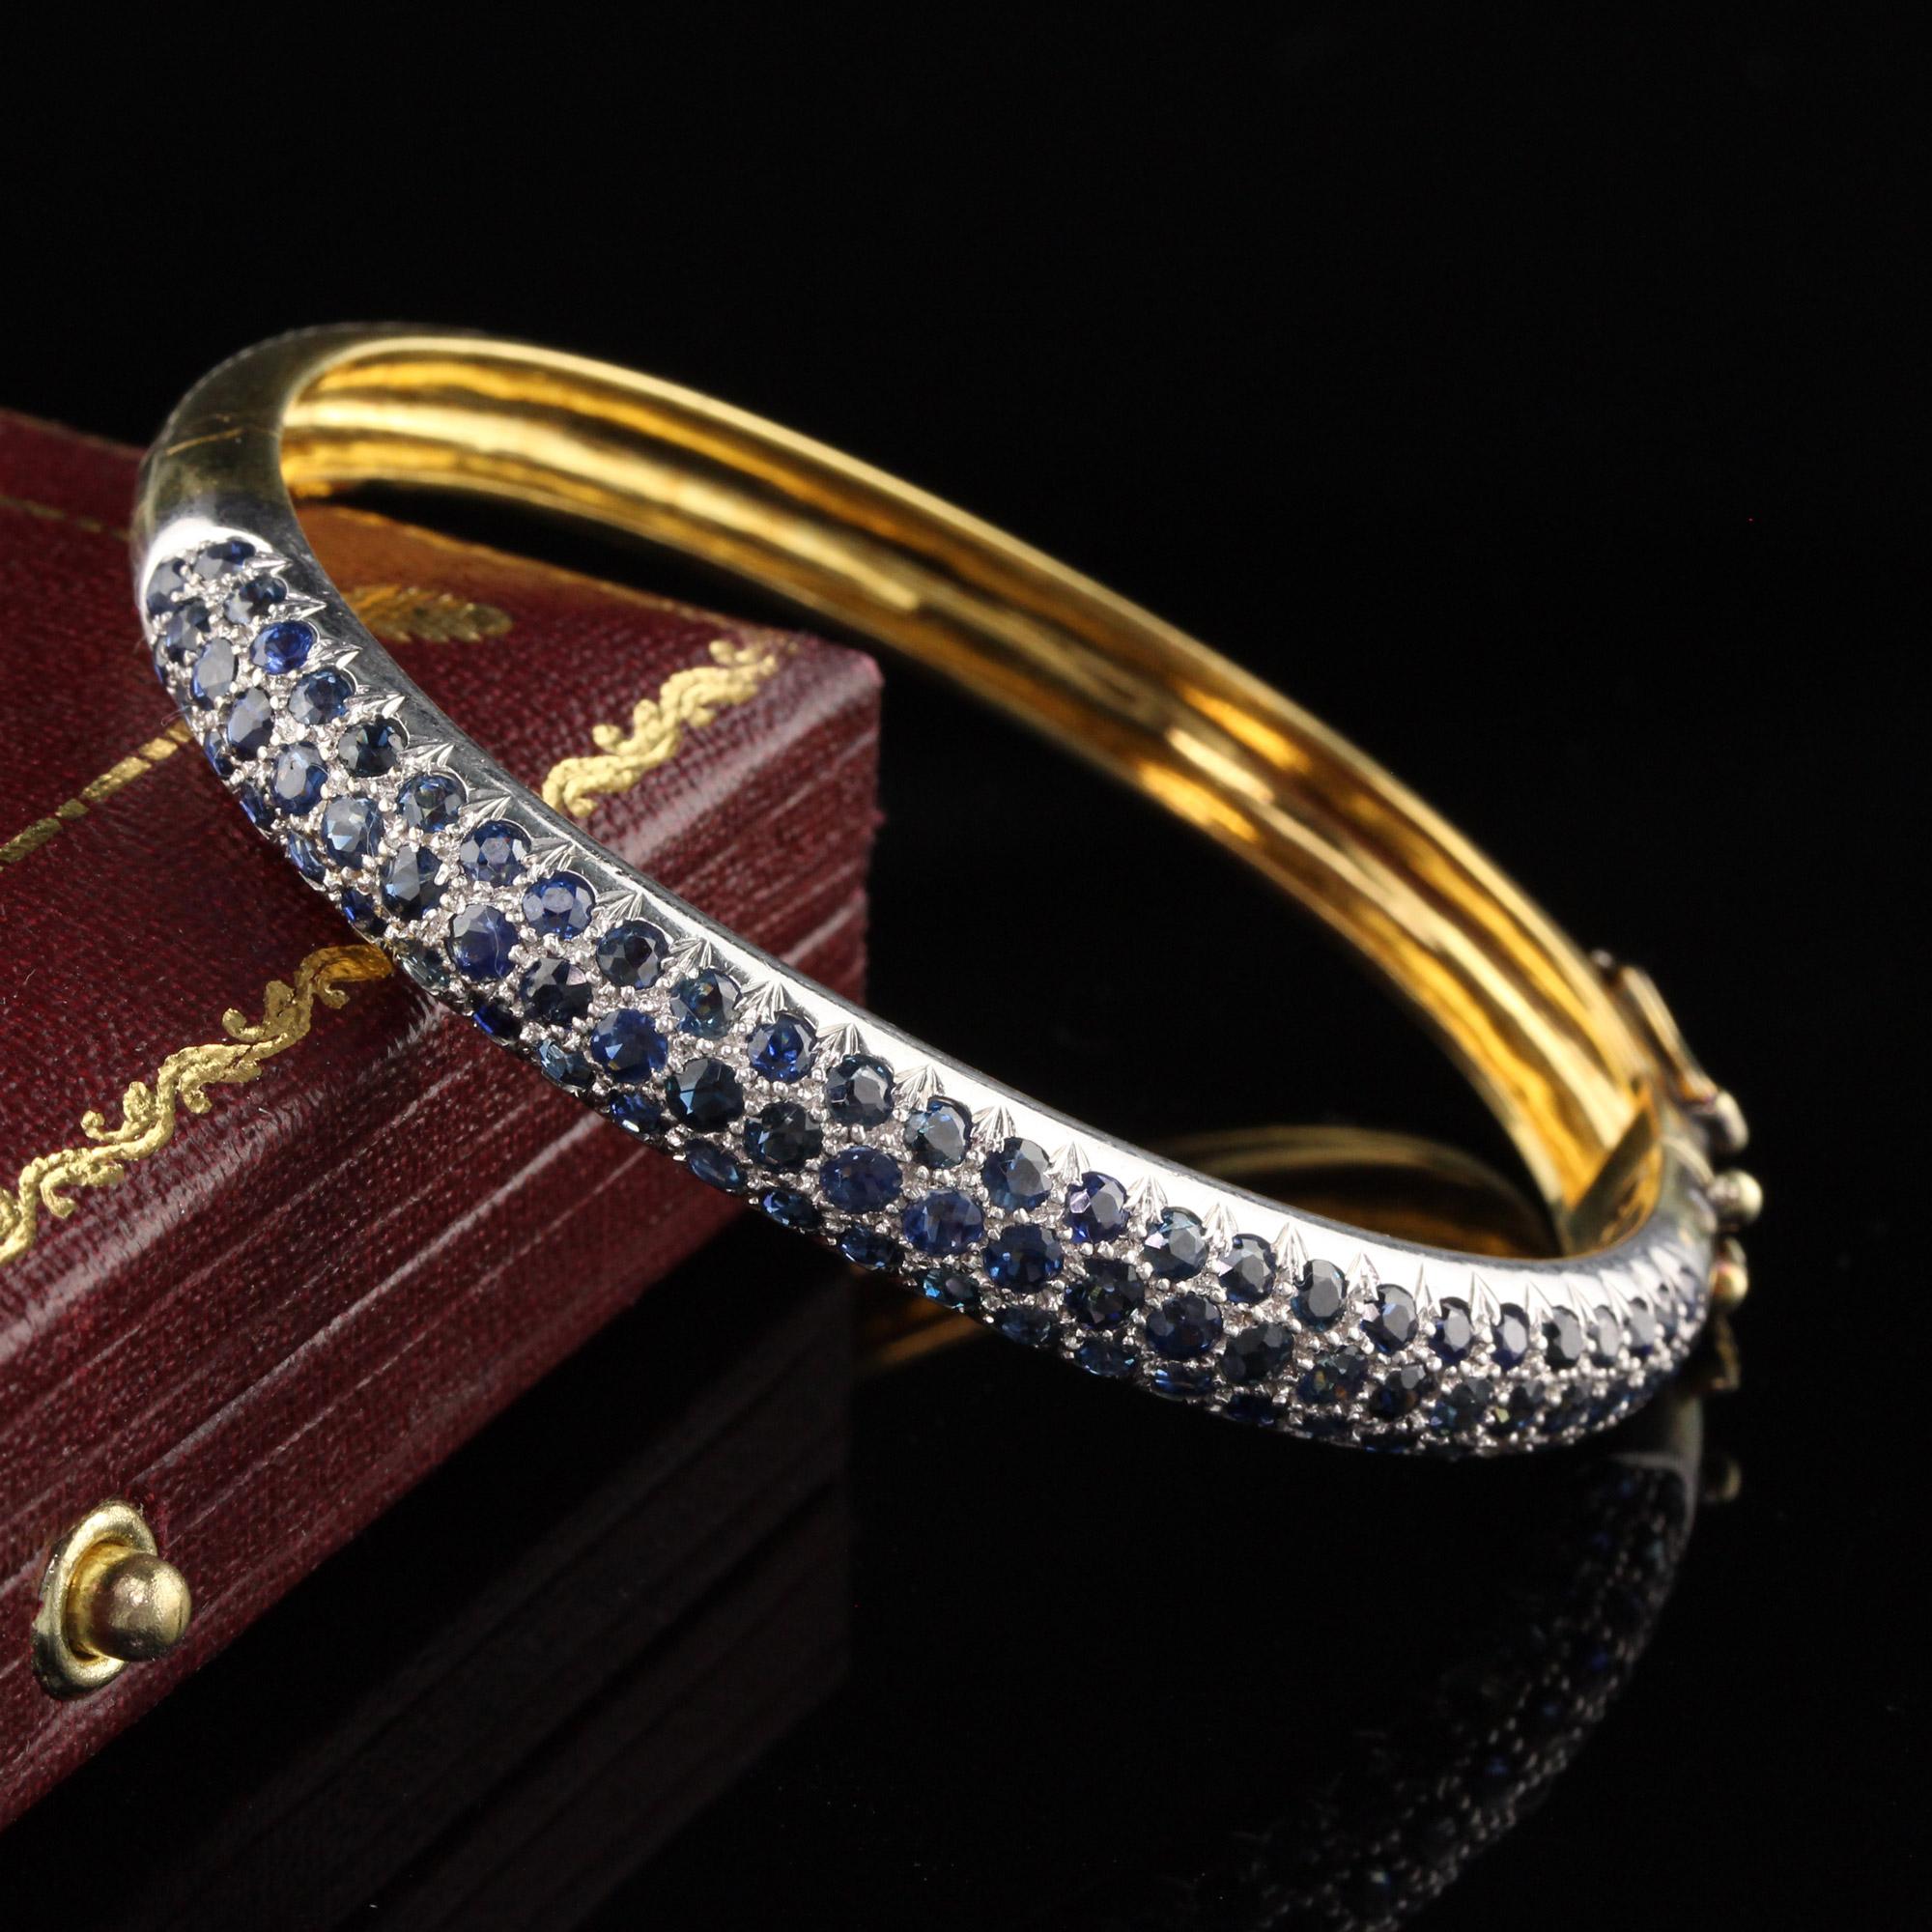 Stunning 18K Yellow Gold and Platinum Bangle

#B0018

Metal: Platinum & 18K Yellow Gold

Weight: 25.2

Sapphire Weight: Approximately 3 CTS

Measurements: 6 in from inside the bangle